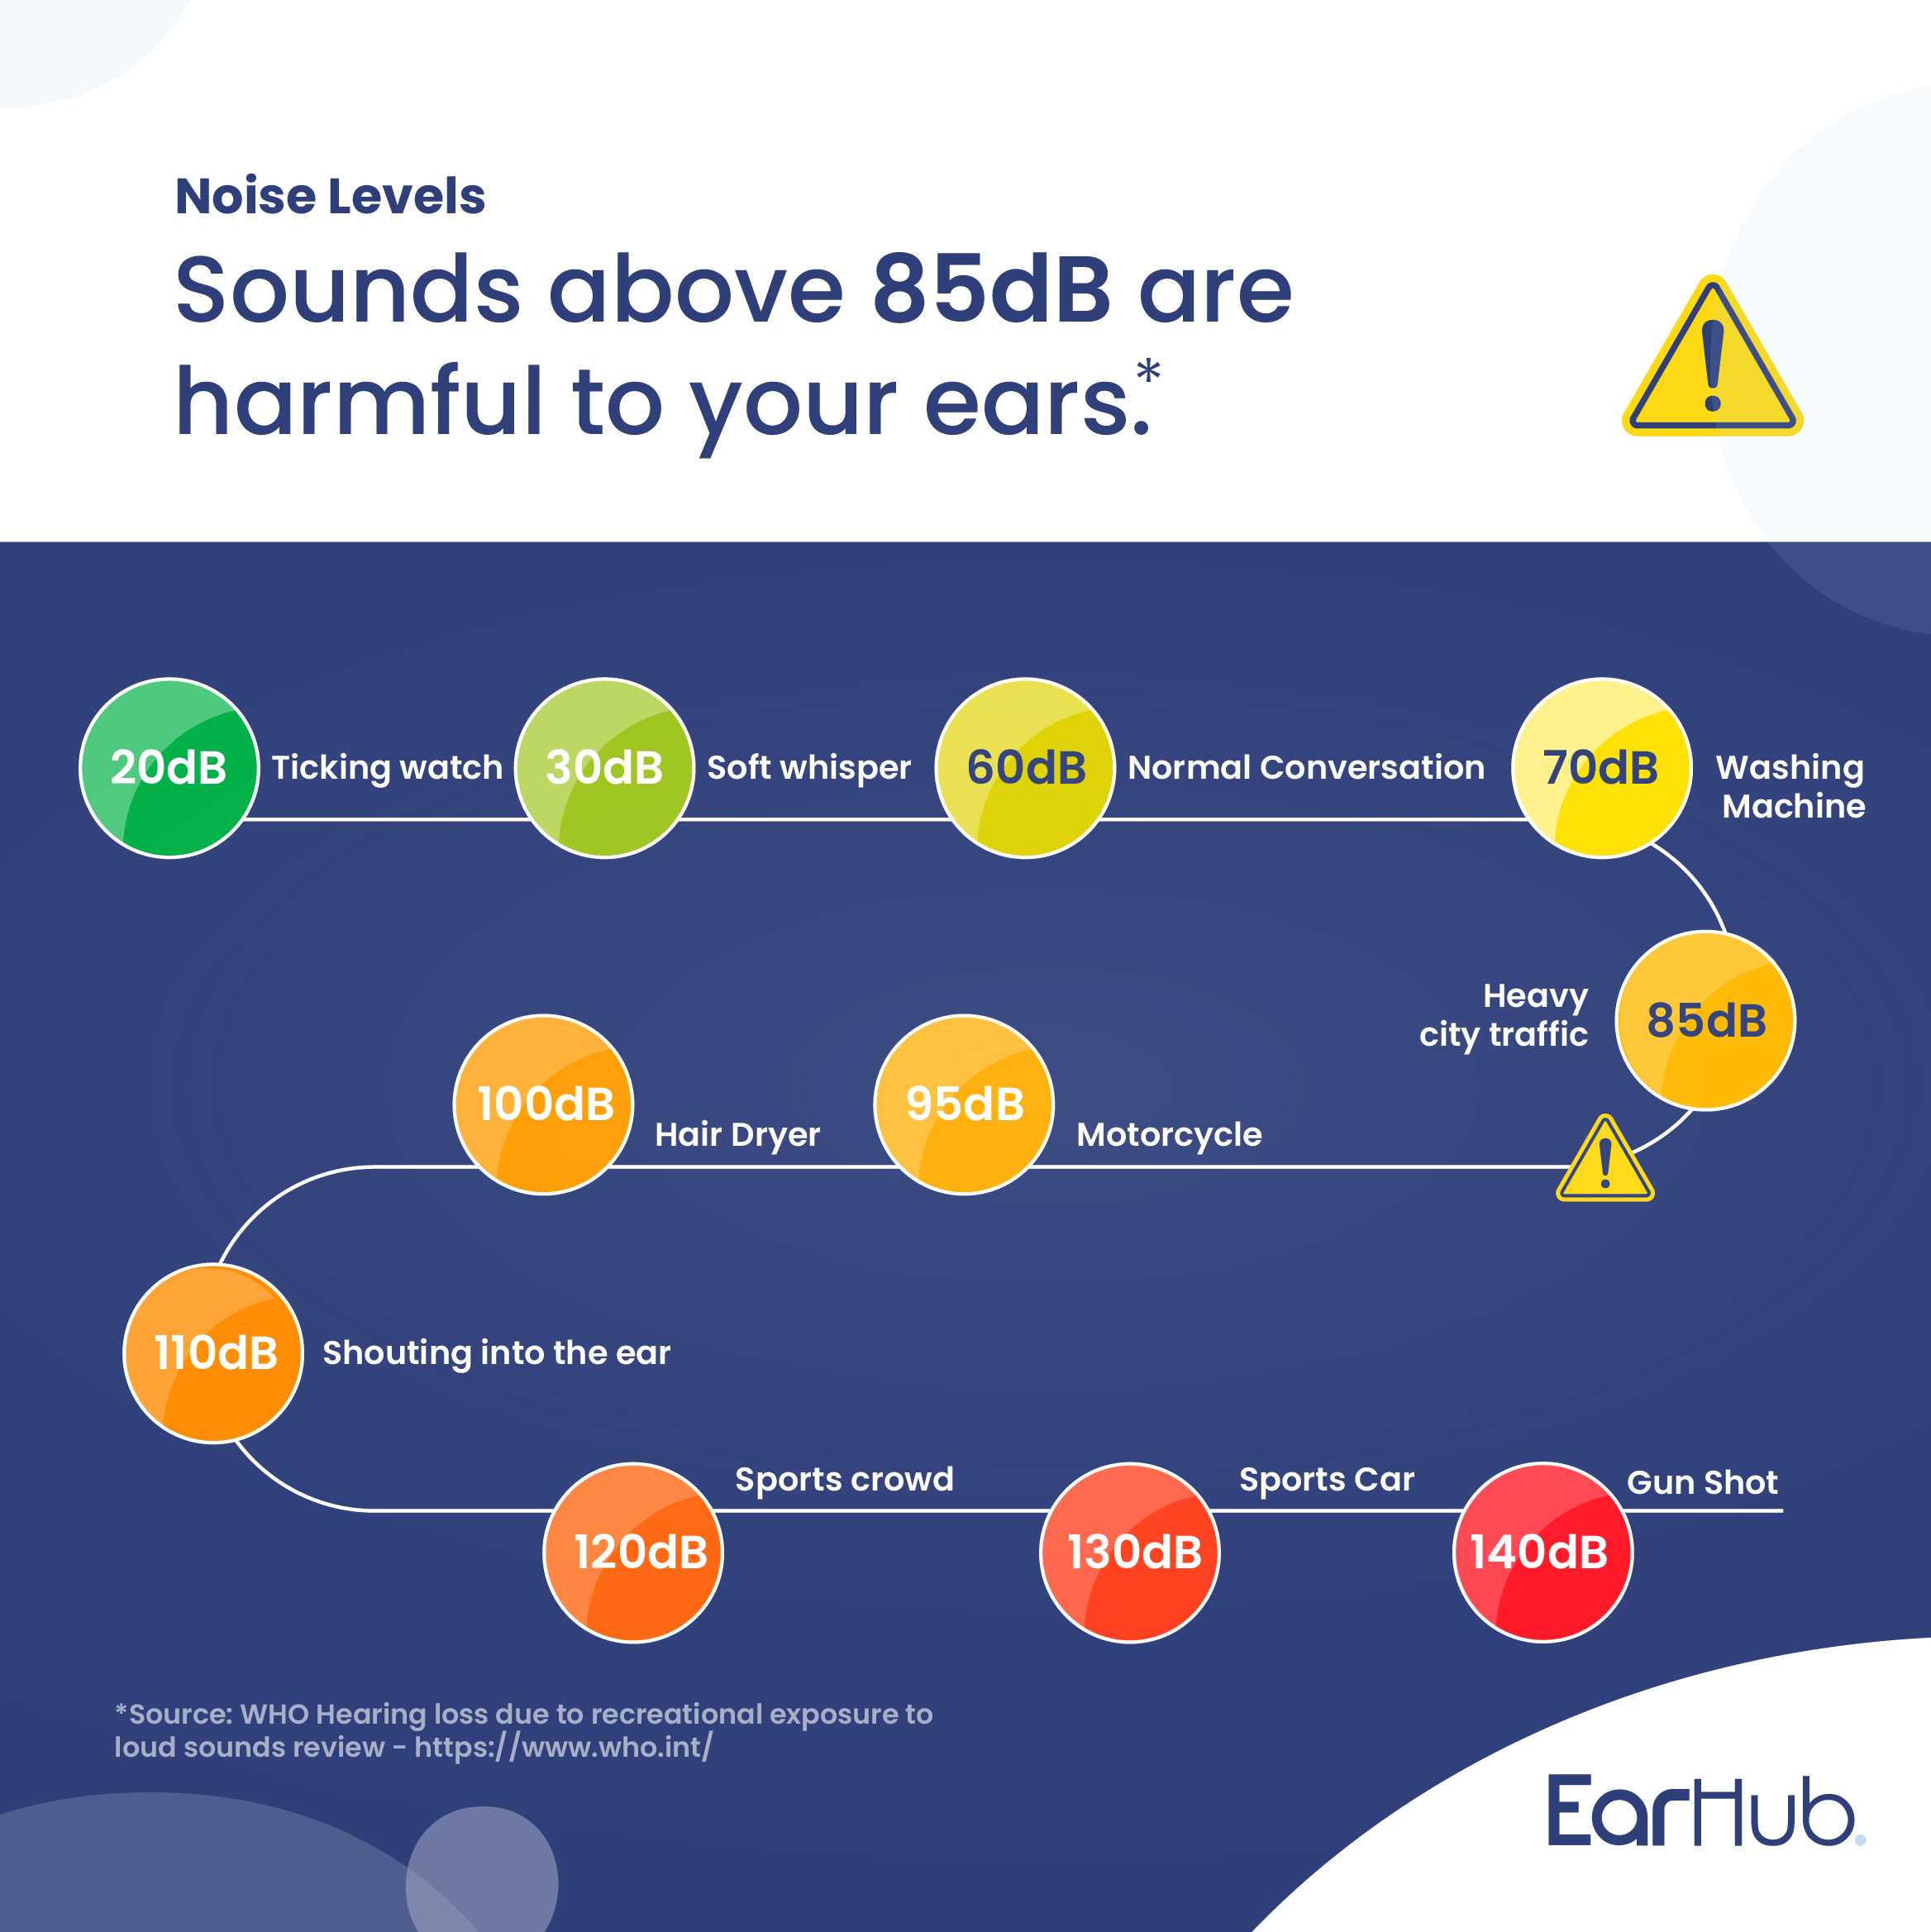 Some examples of common noises and their sound levels. Sounds above 85dB are harmful to your ears.